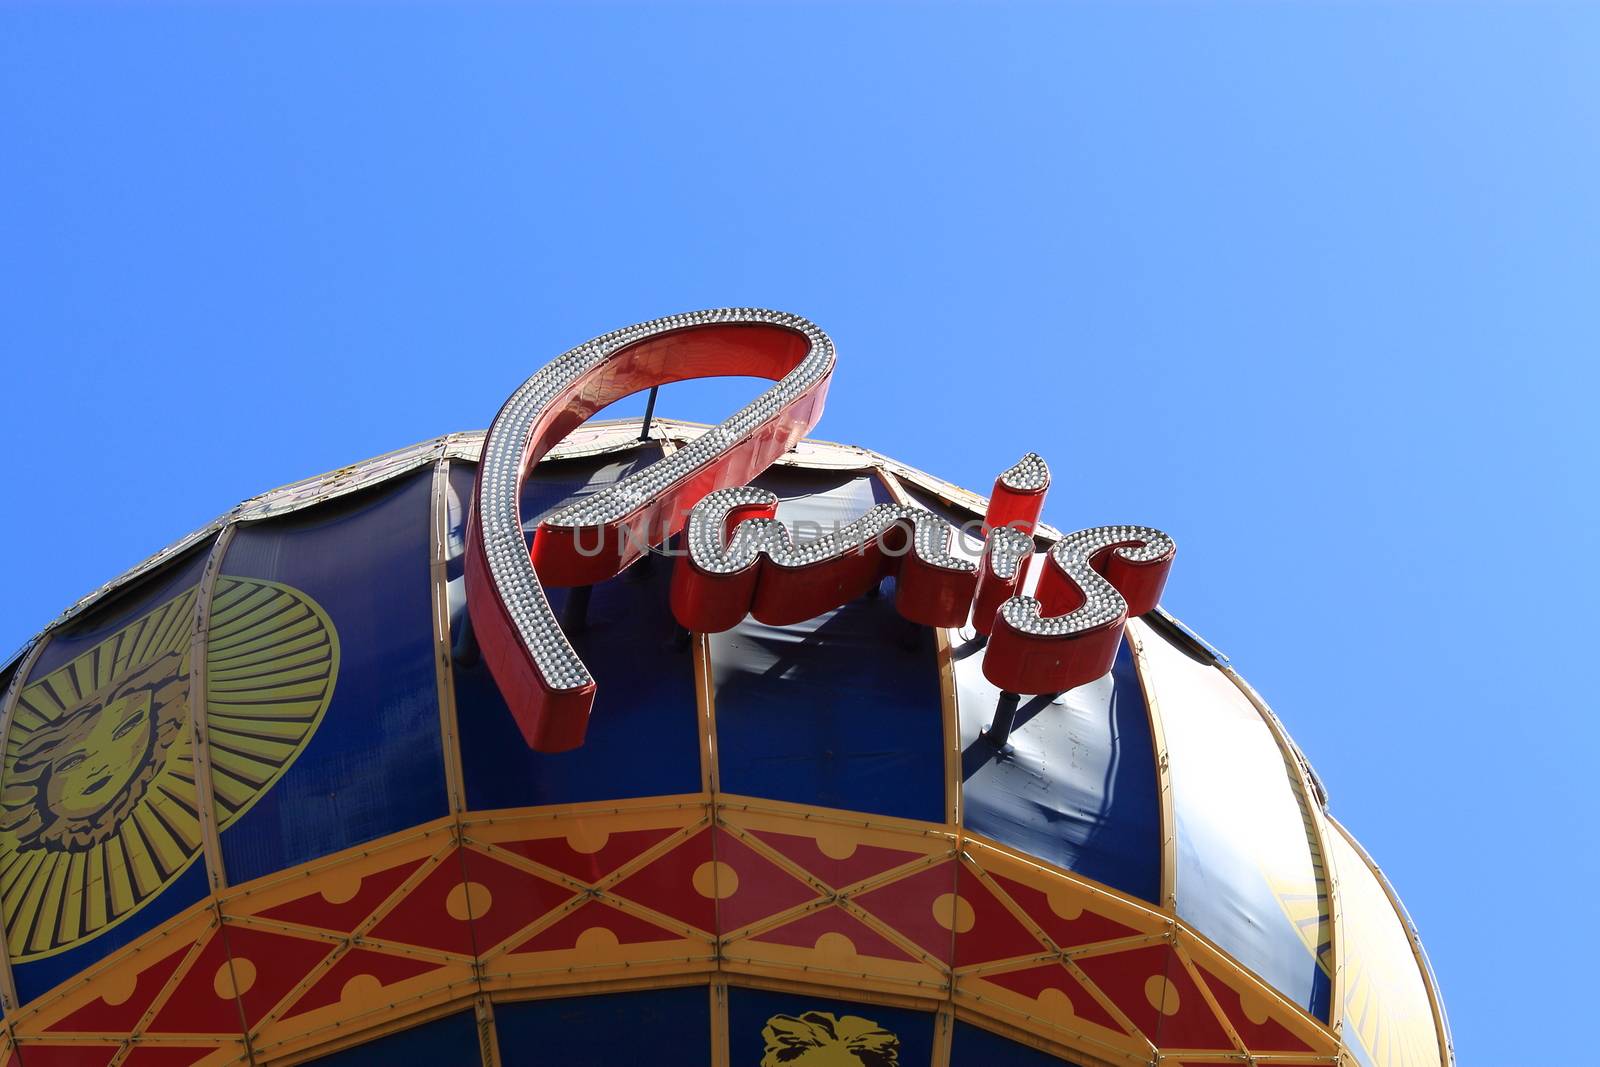 Las Vegas - Paris Hotel and Casino by Ffooter